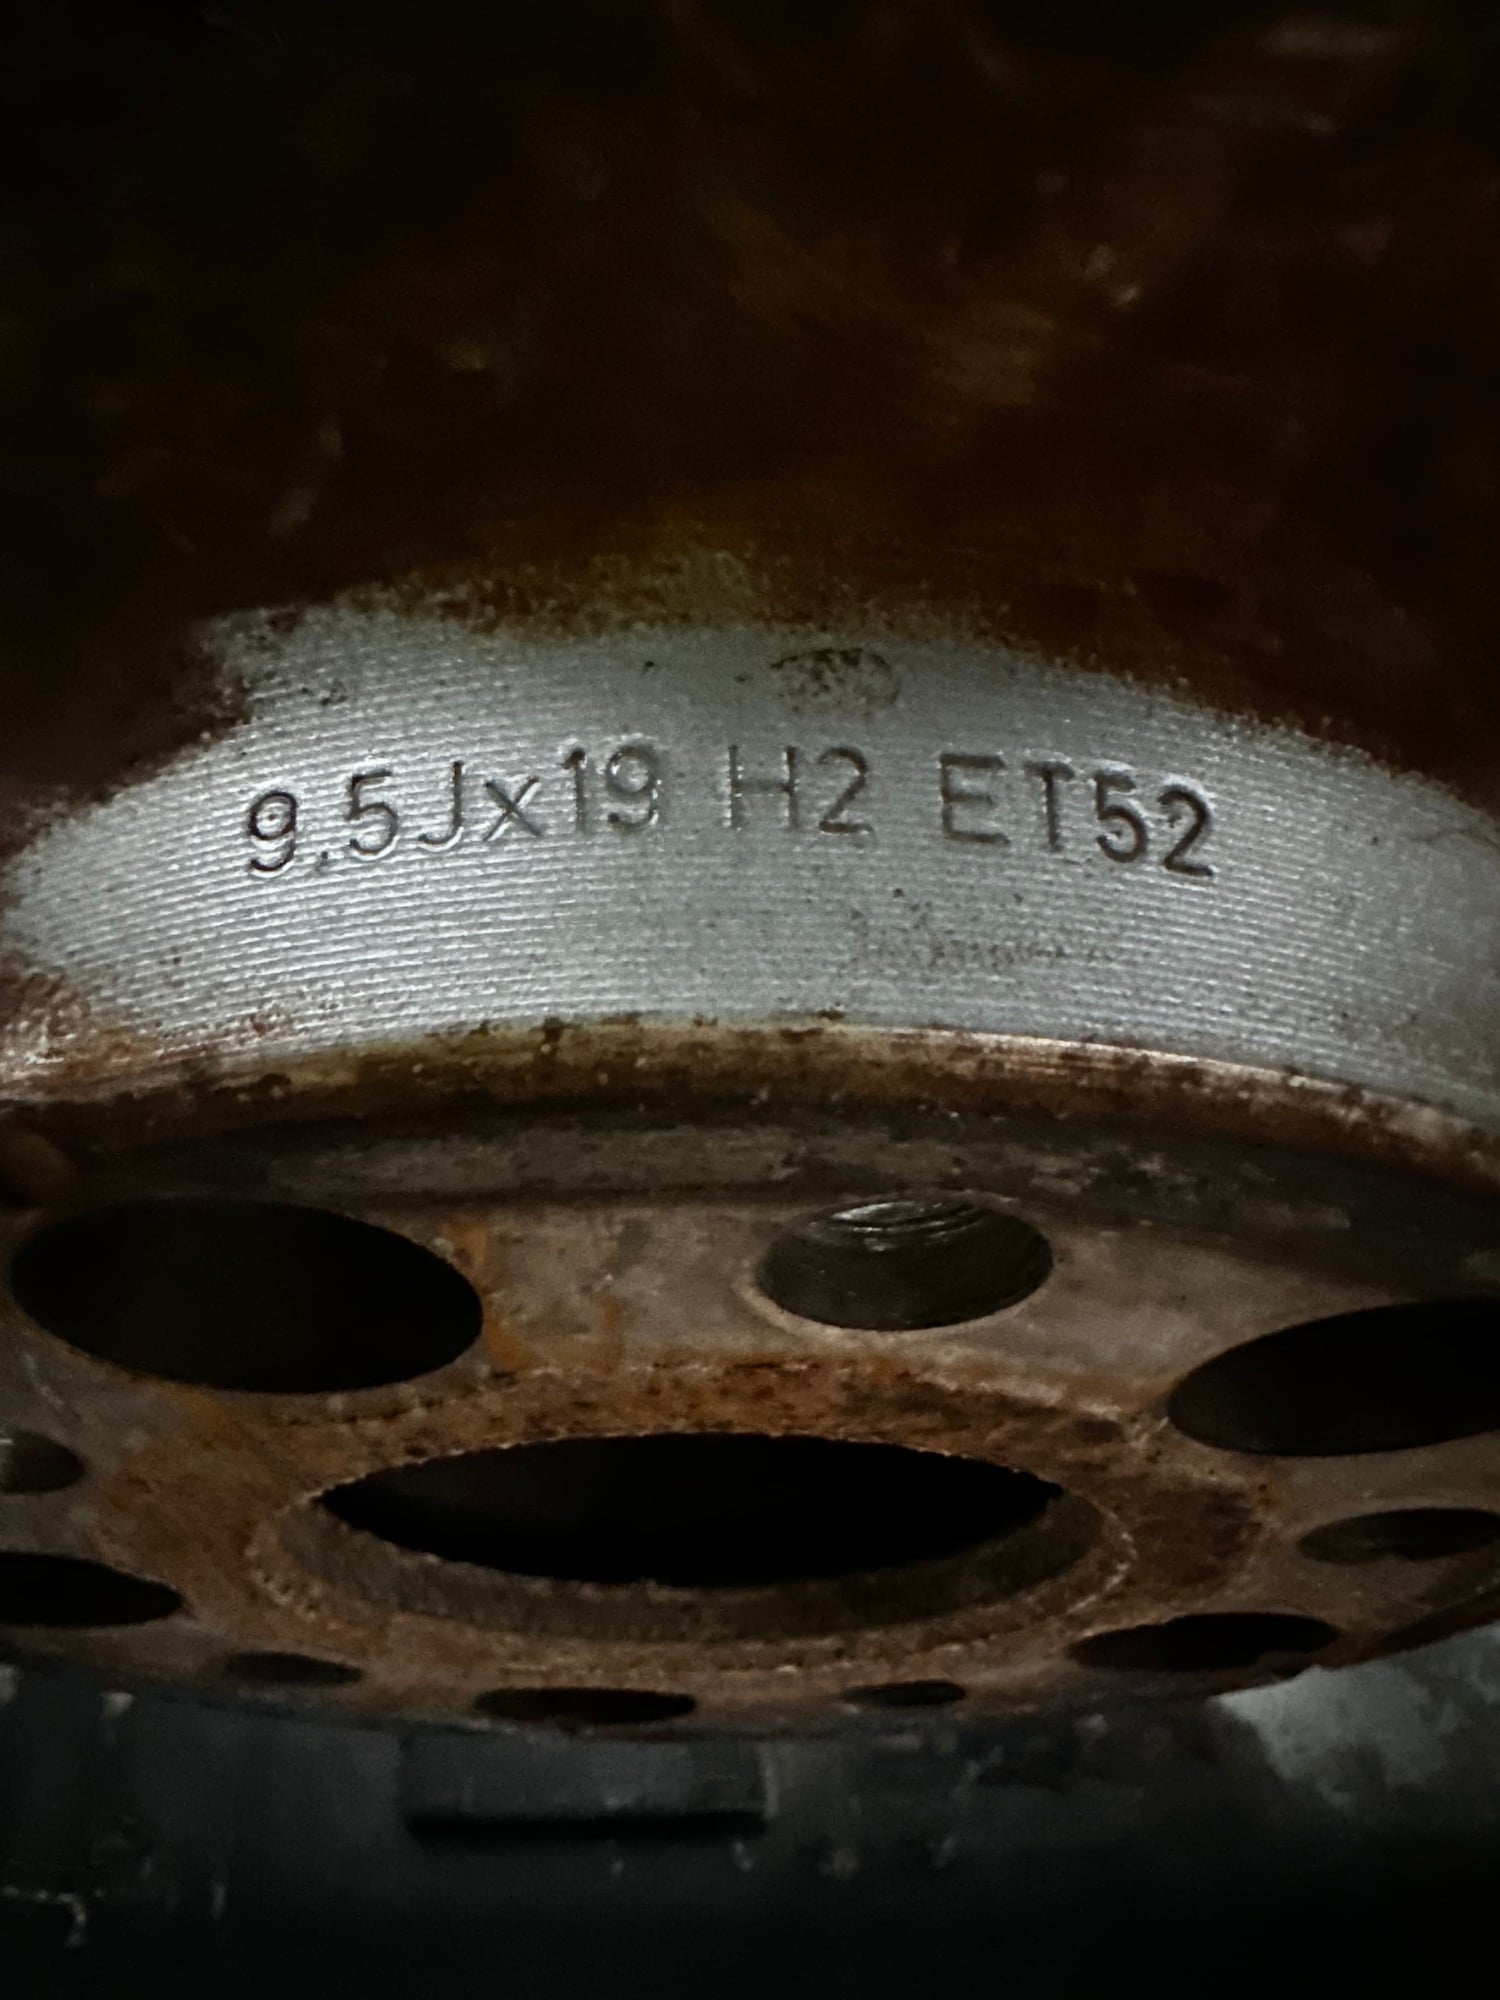 Wheels and Tires/Axles - E63 AMG Rear Wheel - Used - 0  All Models - Orange County, CA 92705, United States